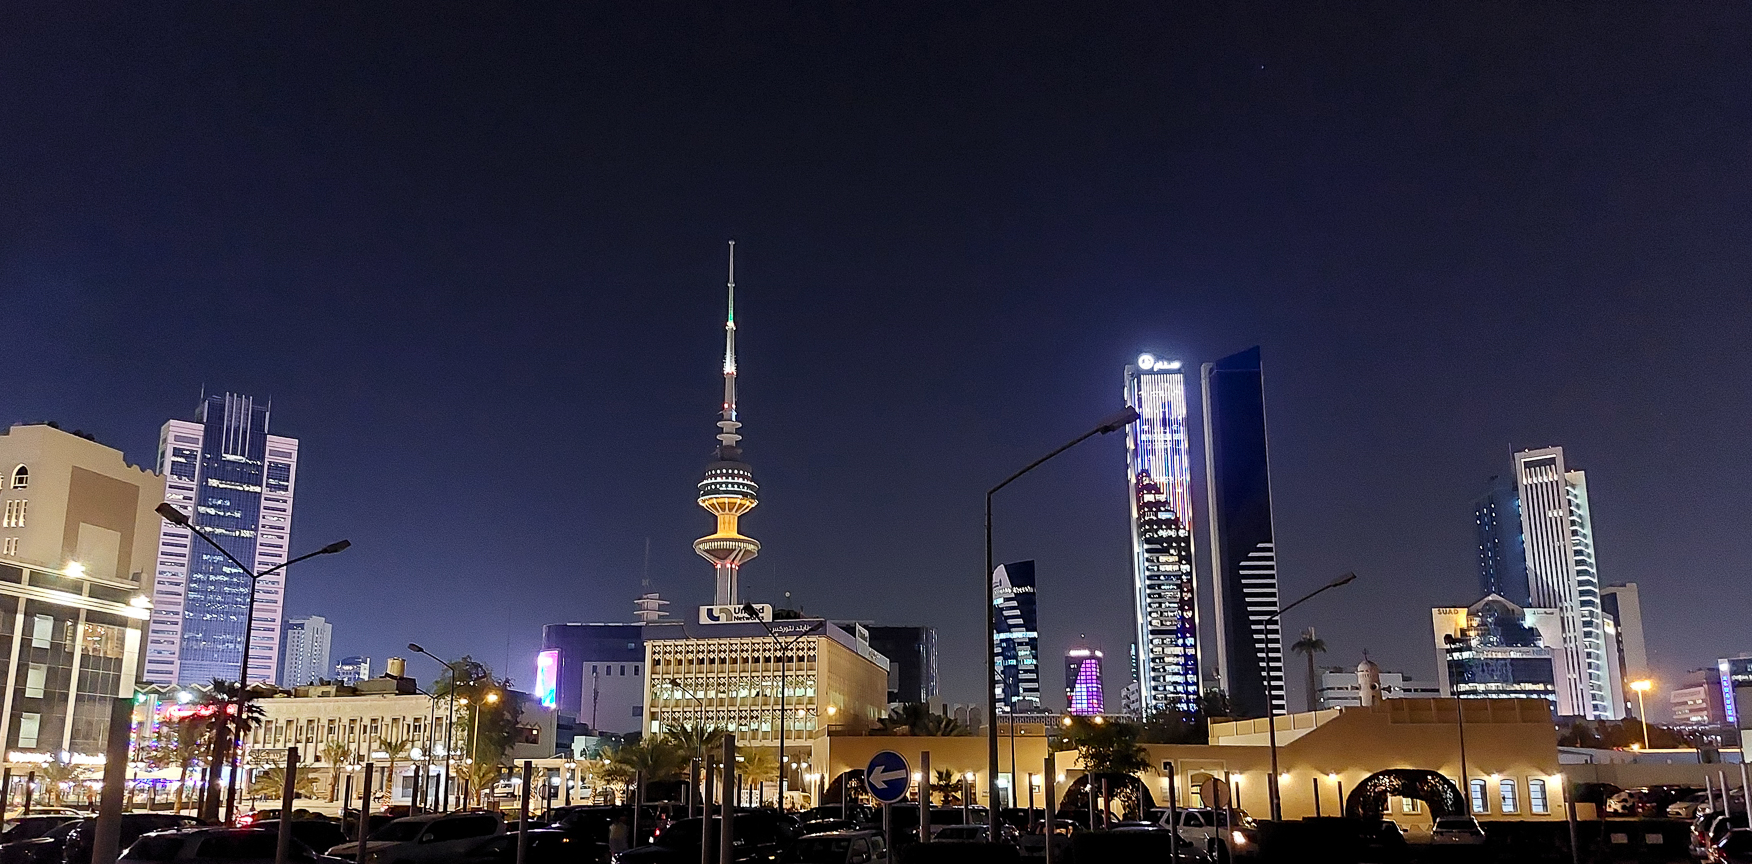 <span  class="uc_style_uc_tiles_grid_image_elementor_uc_items_attribute_title" style="color:#ffffff;">MKuwait City at nighttime</span>